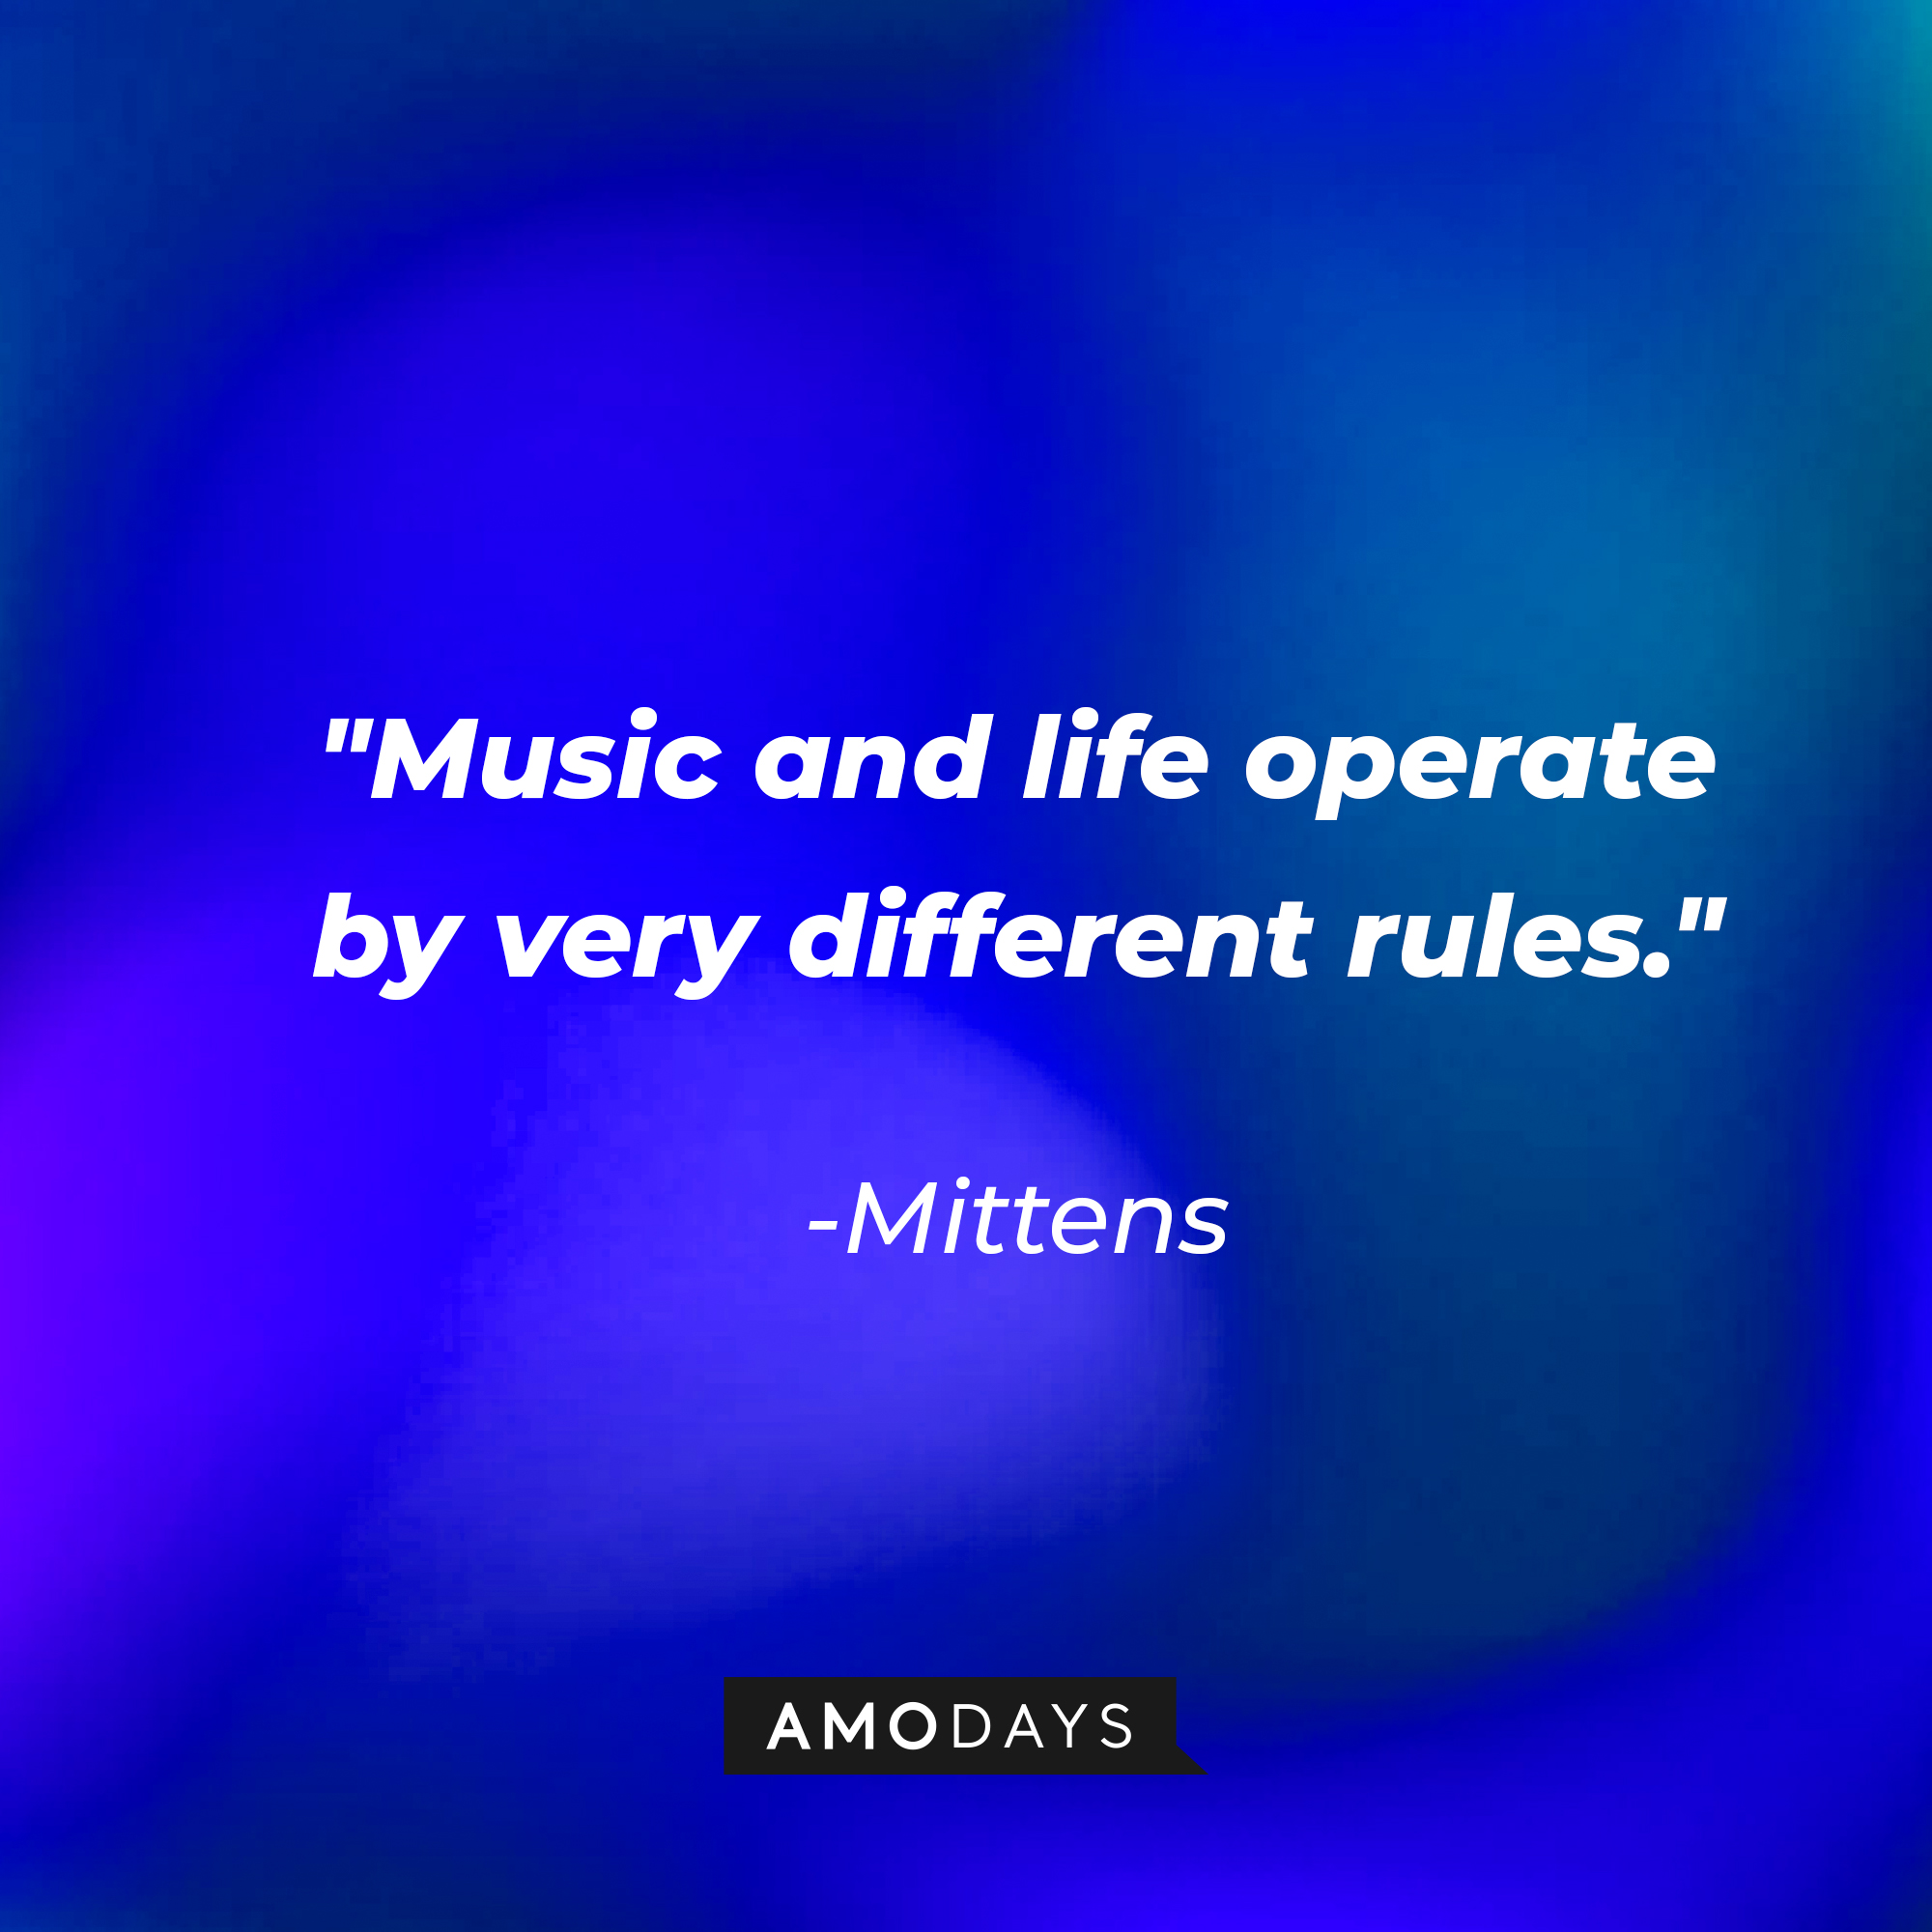 Mittens' quote: "Music and life operate by very different rules." | Source: youtube.com/pixar